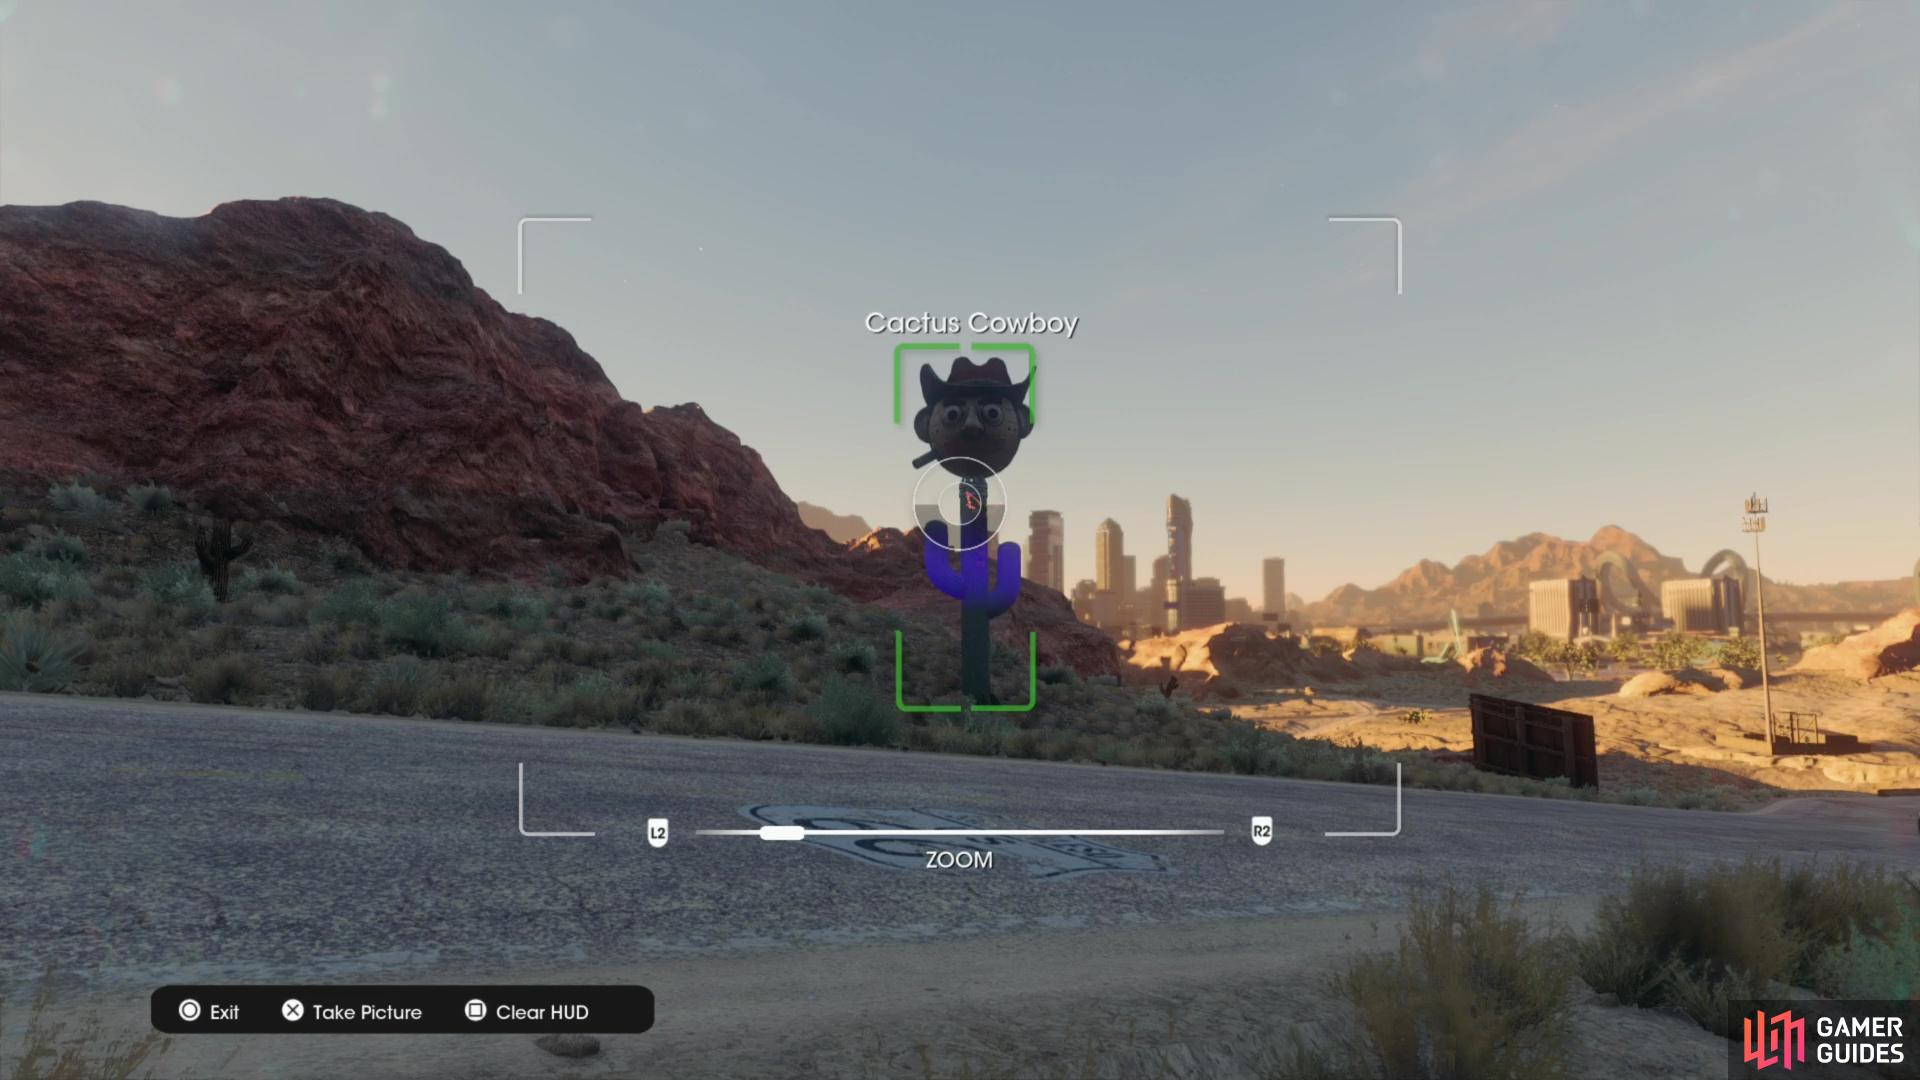 Take a picture of the Cactus Cowboy collectible to obtain it.